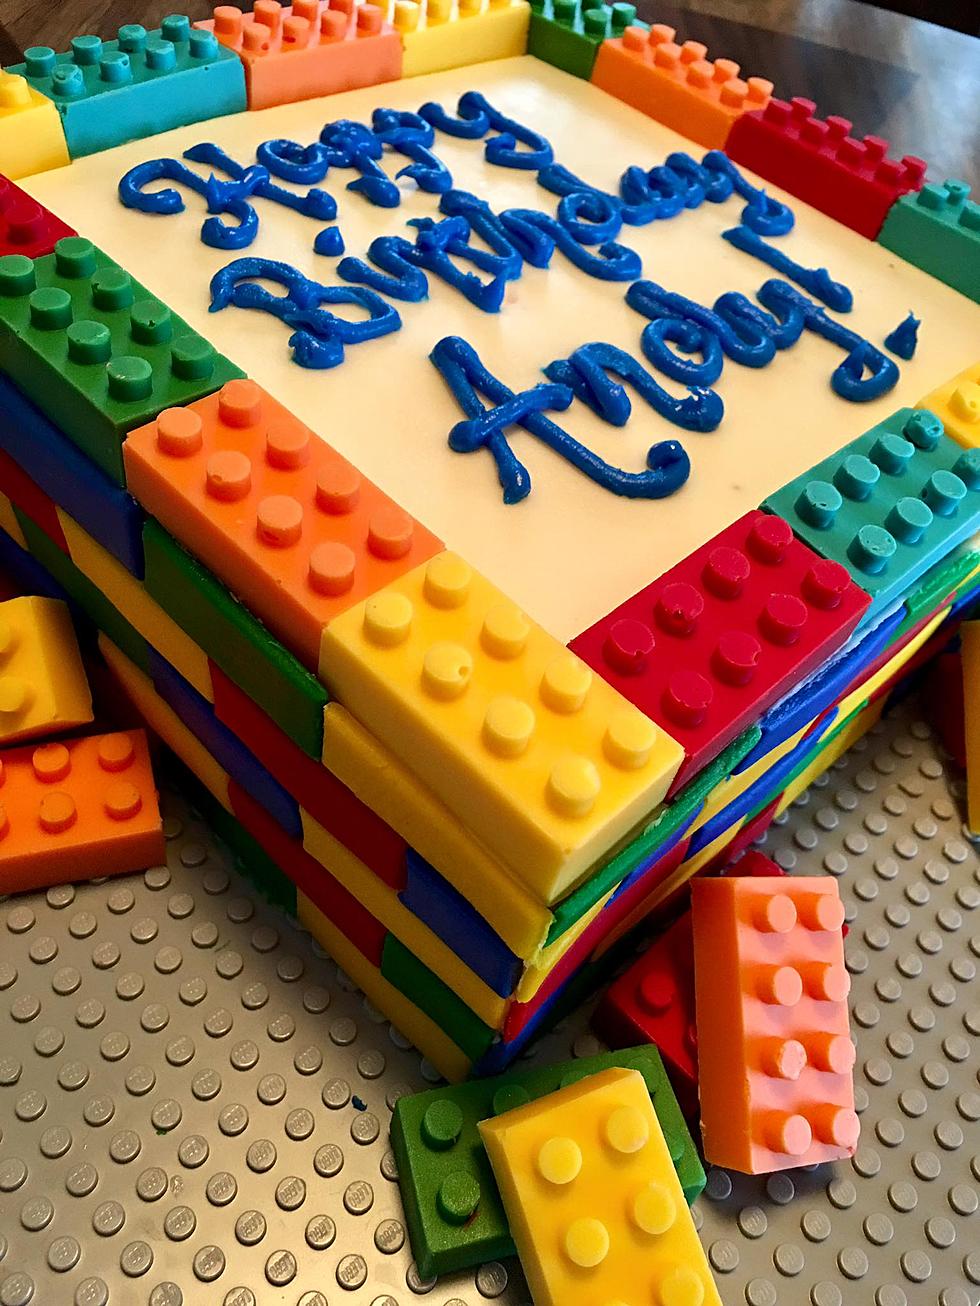 How-To Make Val's Lego Cake [TUTORIAL]